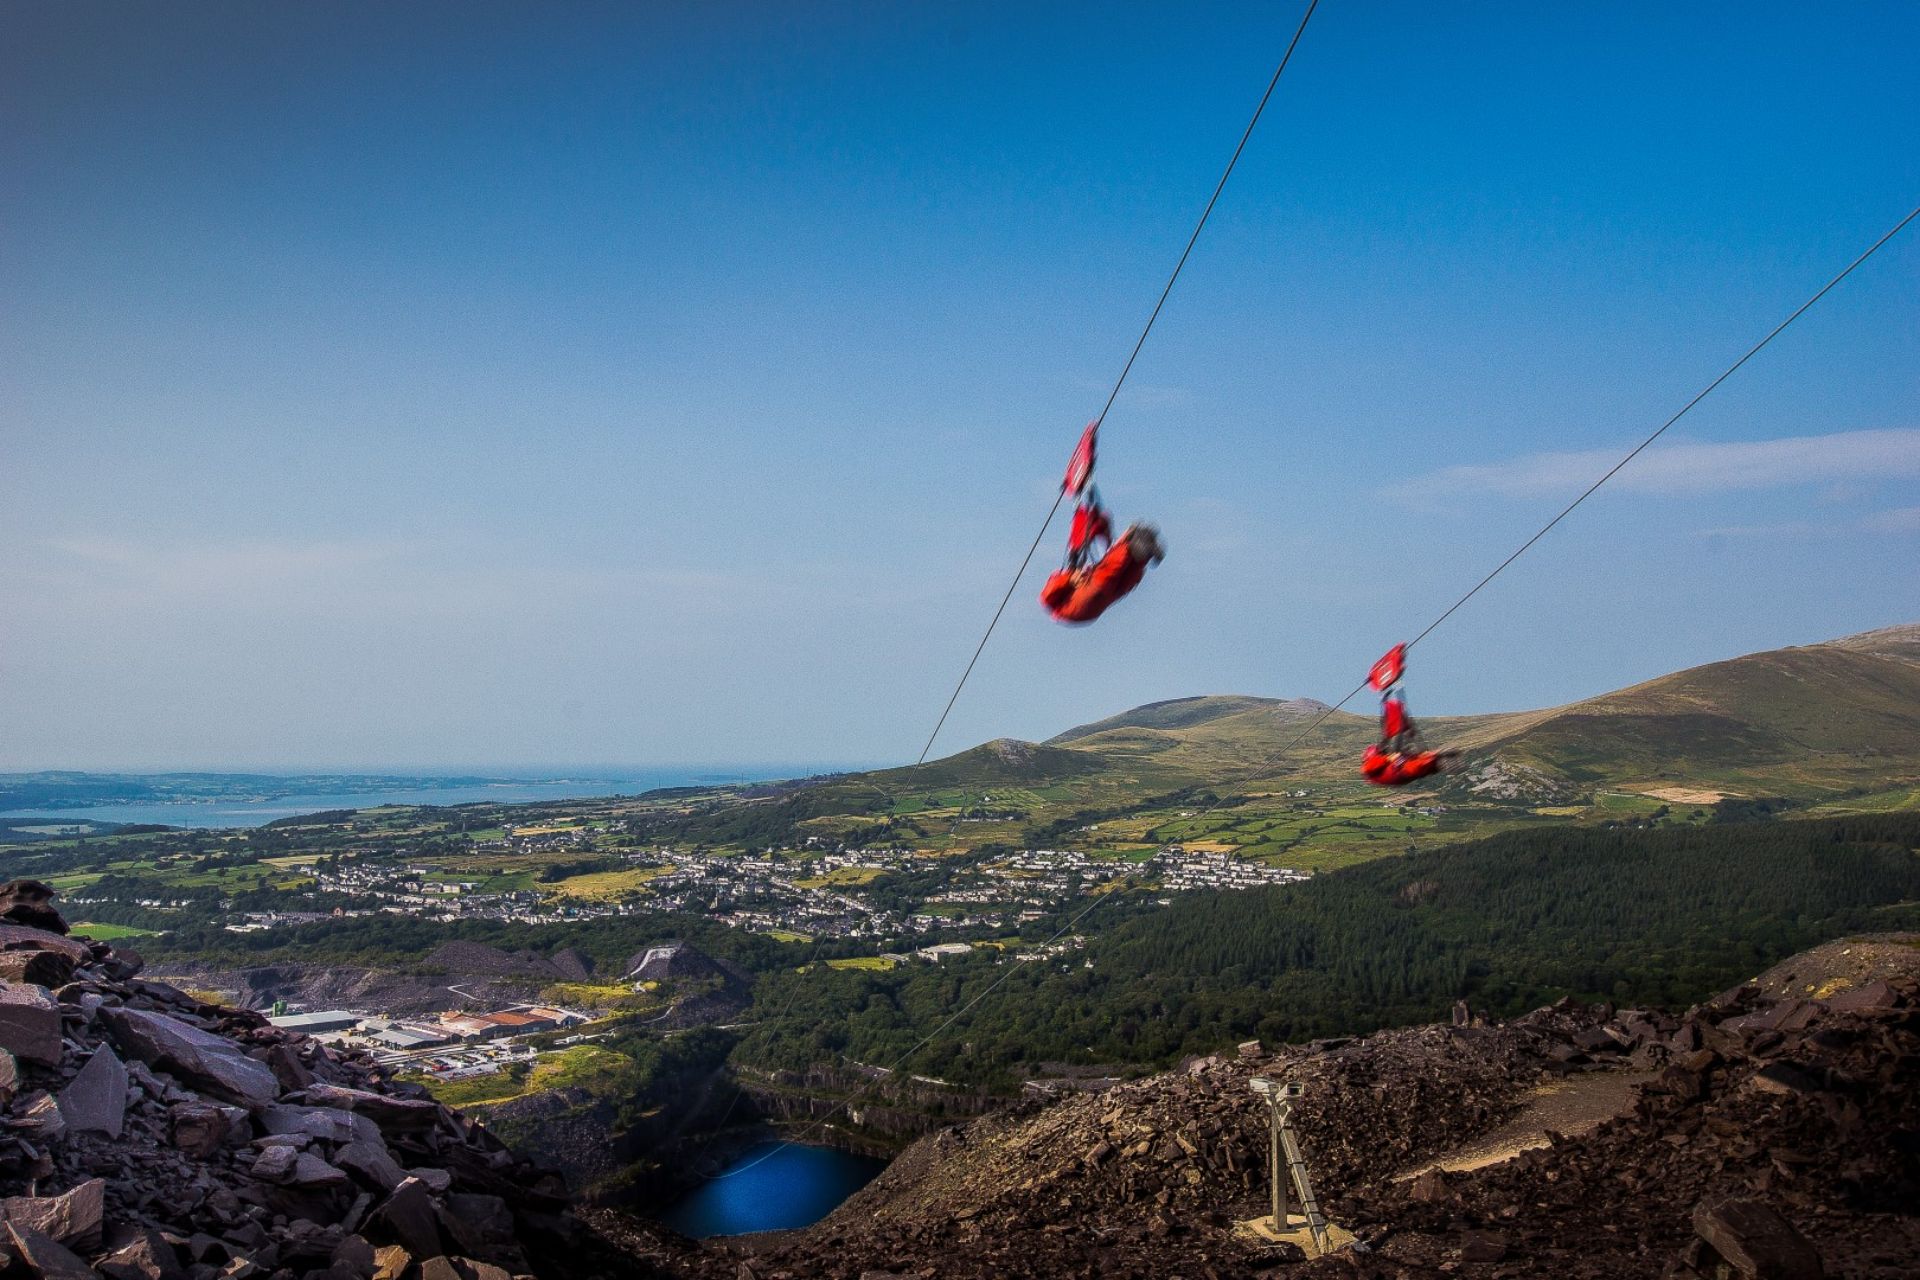 people-in-red-overalls-on-the-fastest-zip-line-in-the-world-going-over-a-quarry-in-the-mountains-north-wales-snowdonia-zip-world-adrenaline-junkie-bucket-list